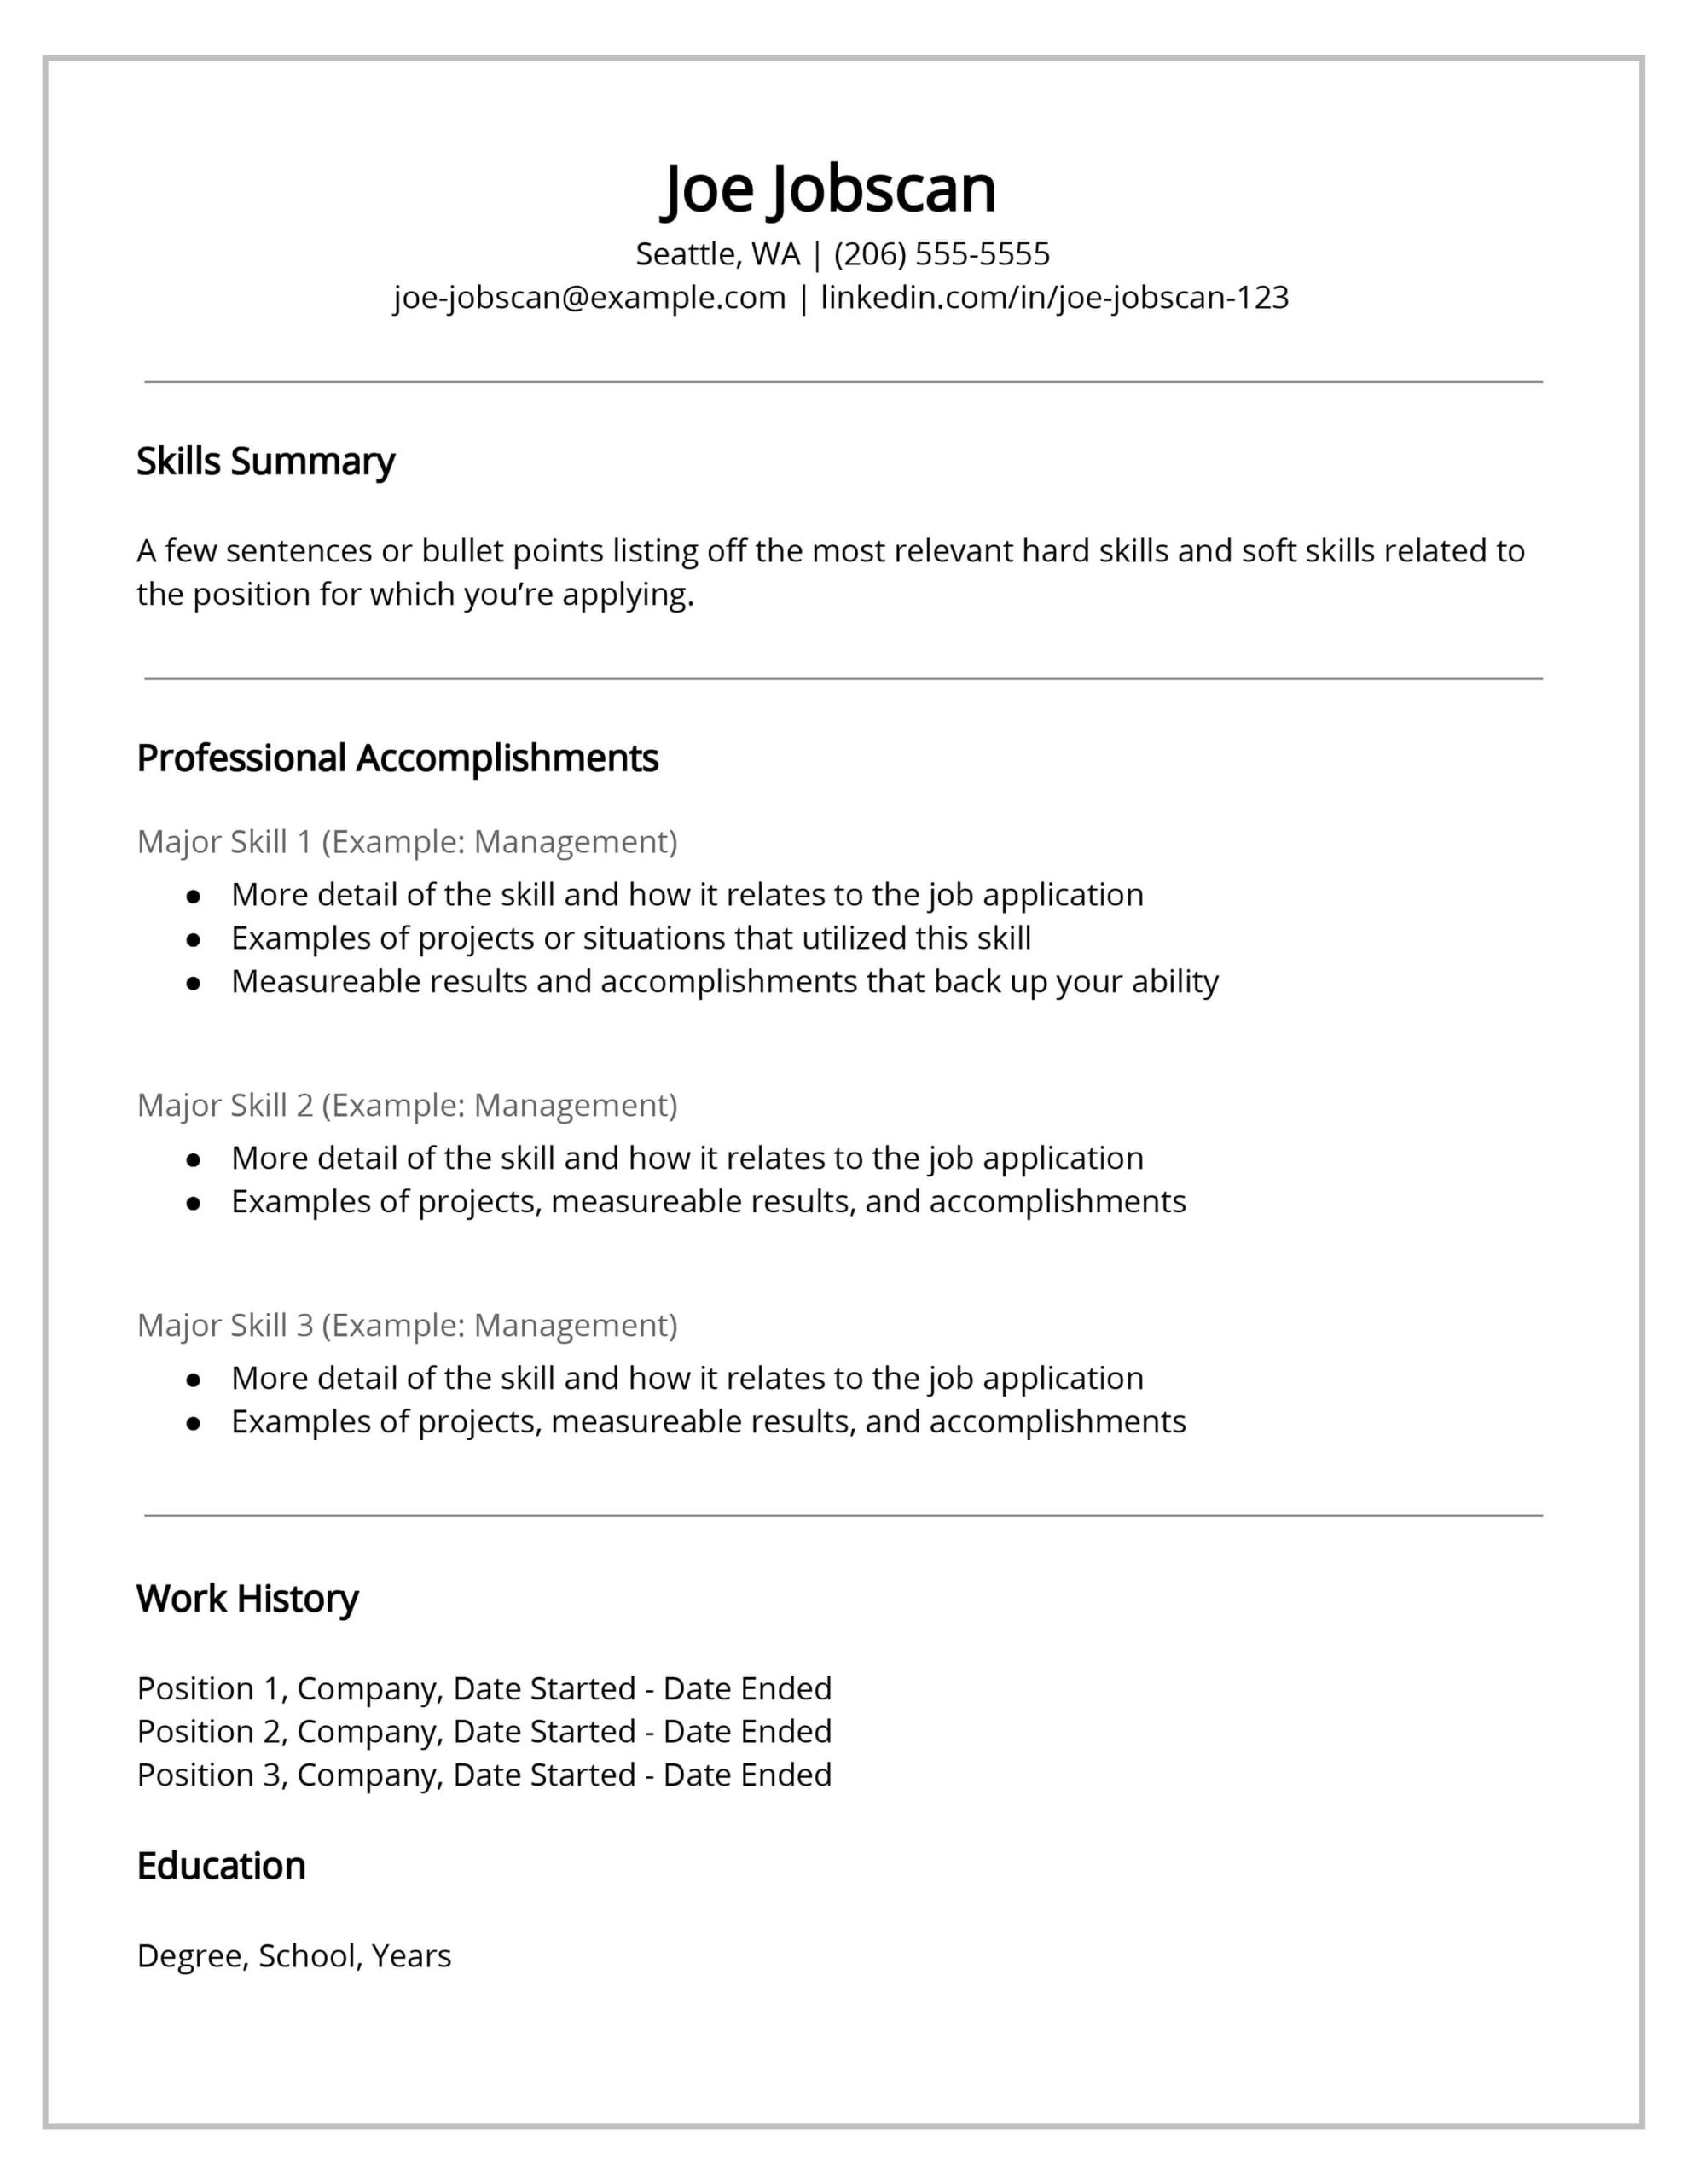 Resume Samples for Any Kind Of Job Recruiters Hate the Functional Resume formatâdo This Instead